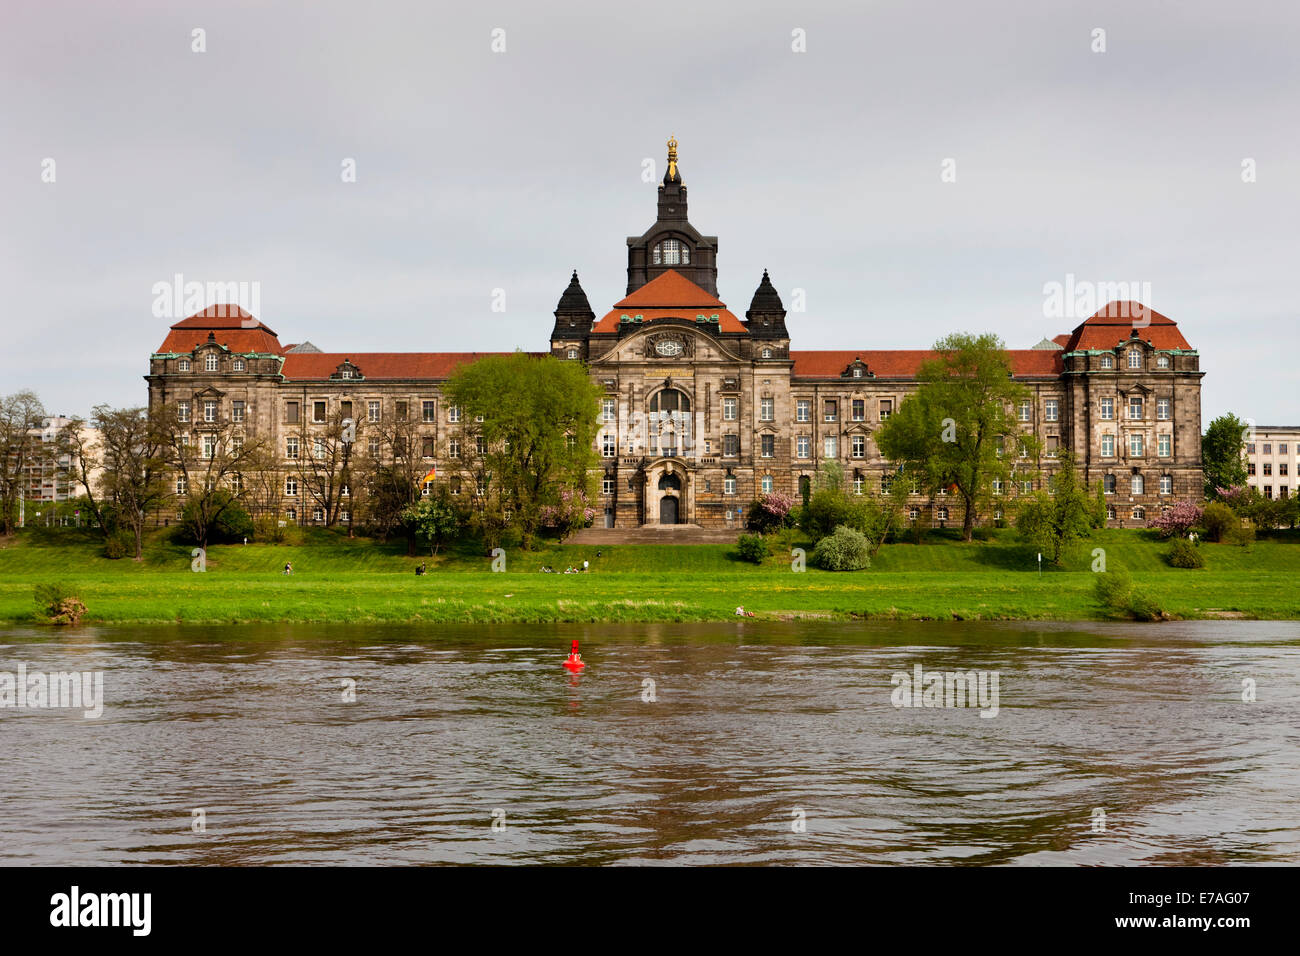 Sächsische Staatskanzlei or Saxon State Chancellery, the Elbe river in the foreground, Dresden, Saxony, Germany Stock Photo